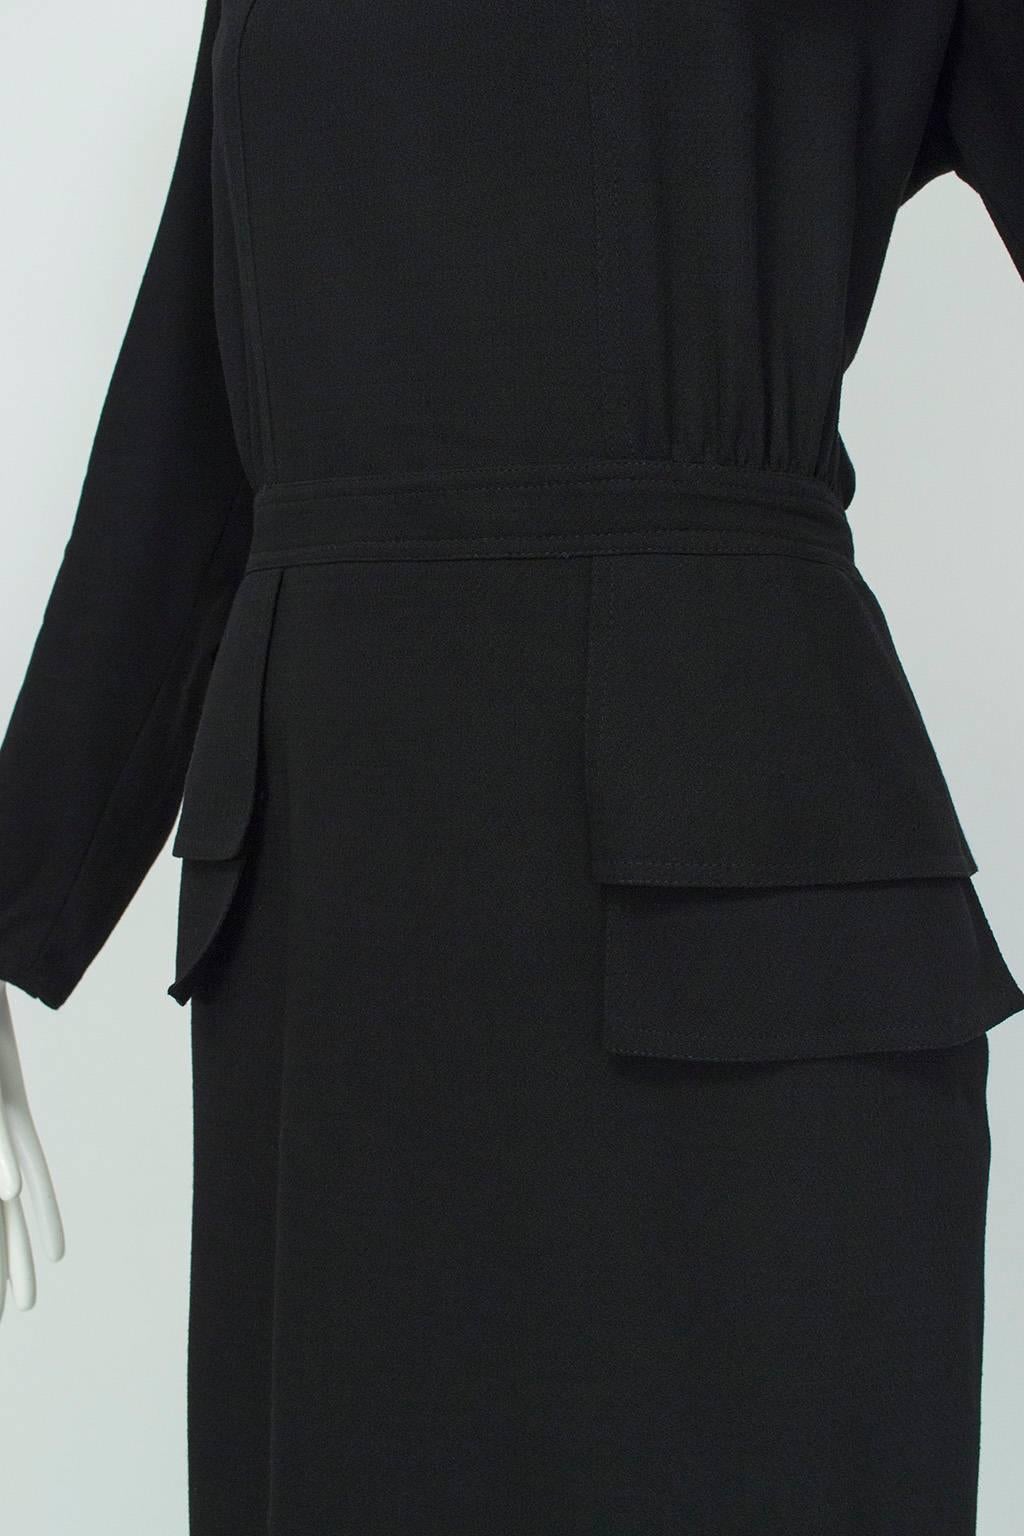 Valentino Black Long Sleeve Crêpe Back-Button Peplum Shift Dress - L, 1980s In Good Condition For Sale In Tucson, AZ